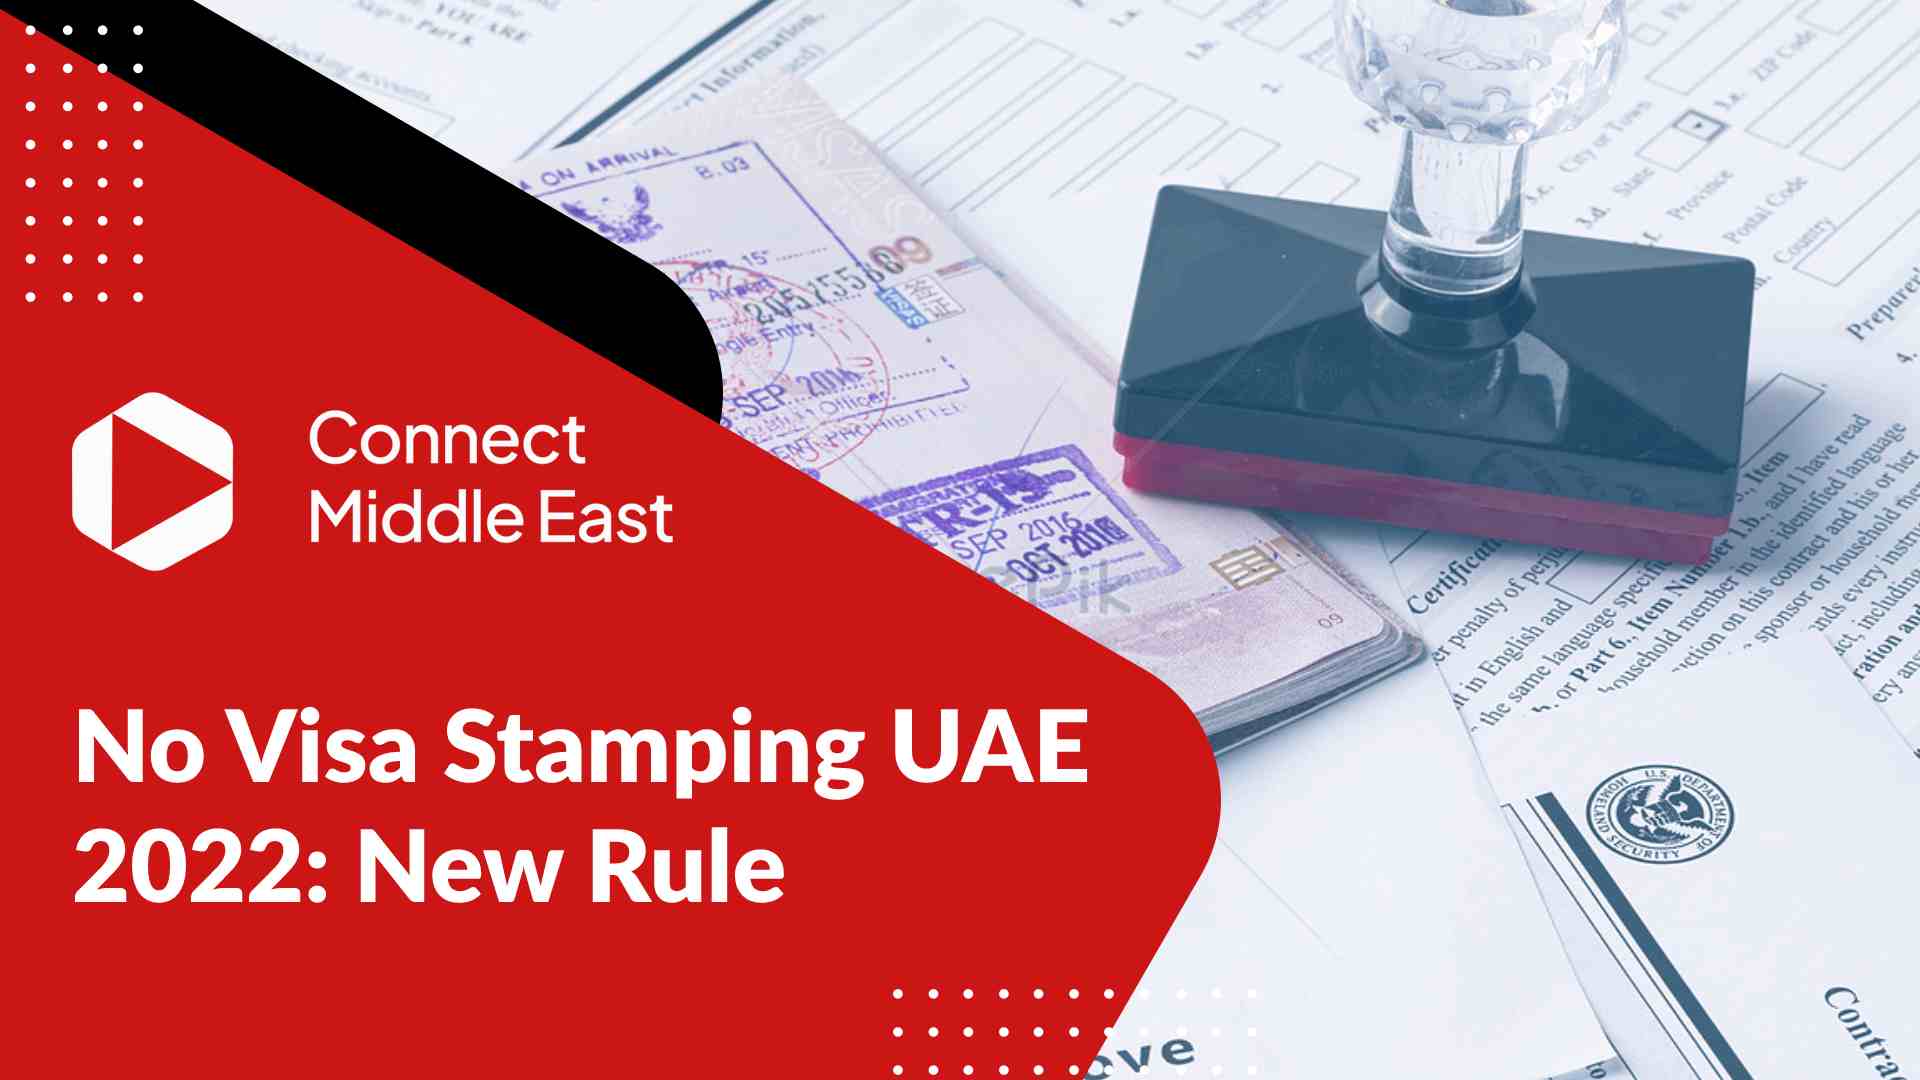 can i travel without visa stamping in uae